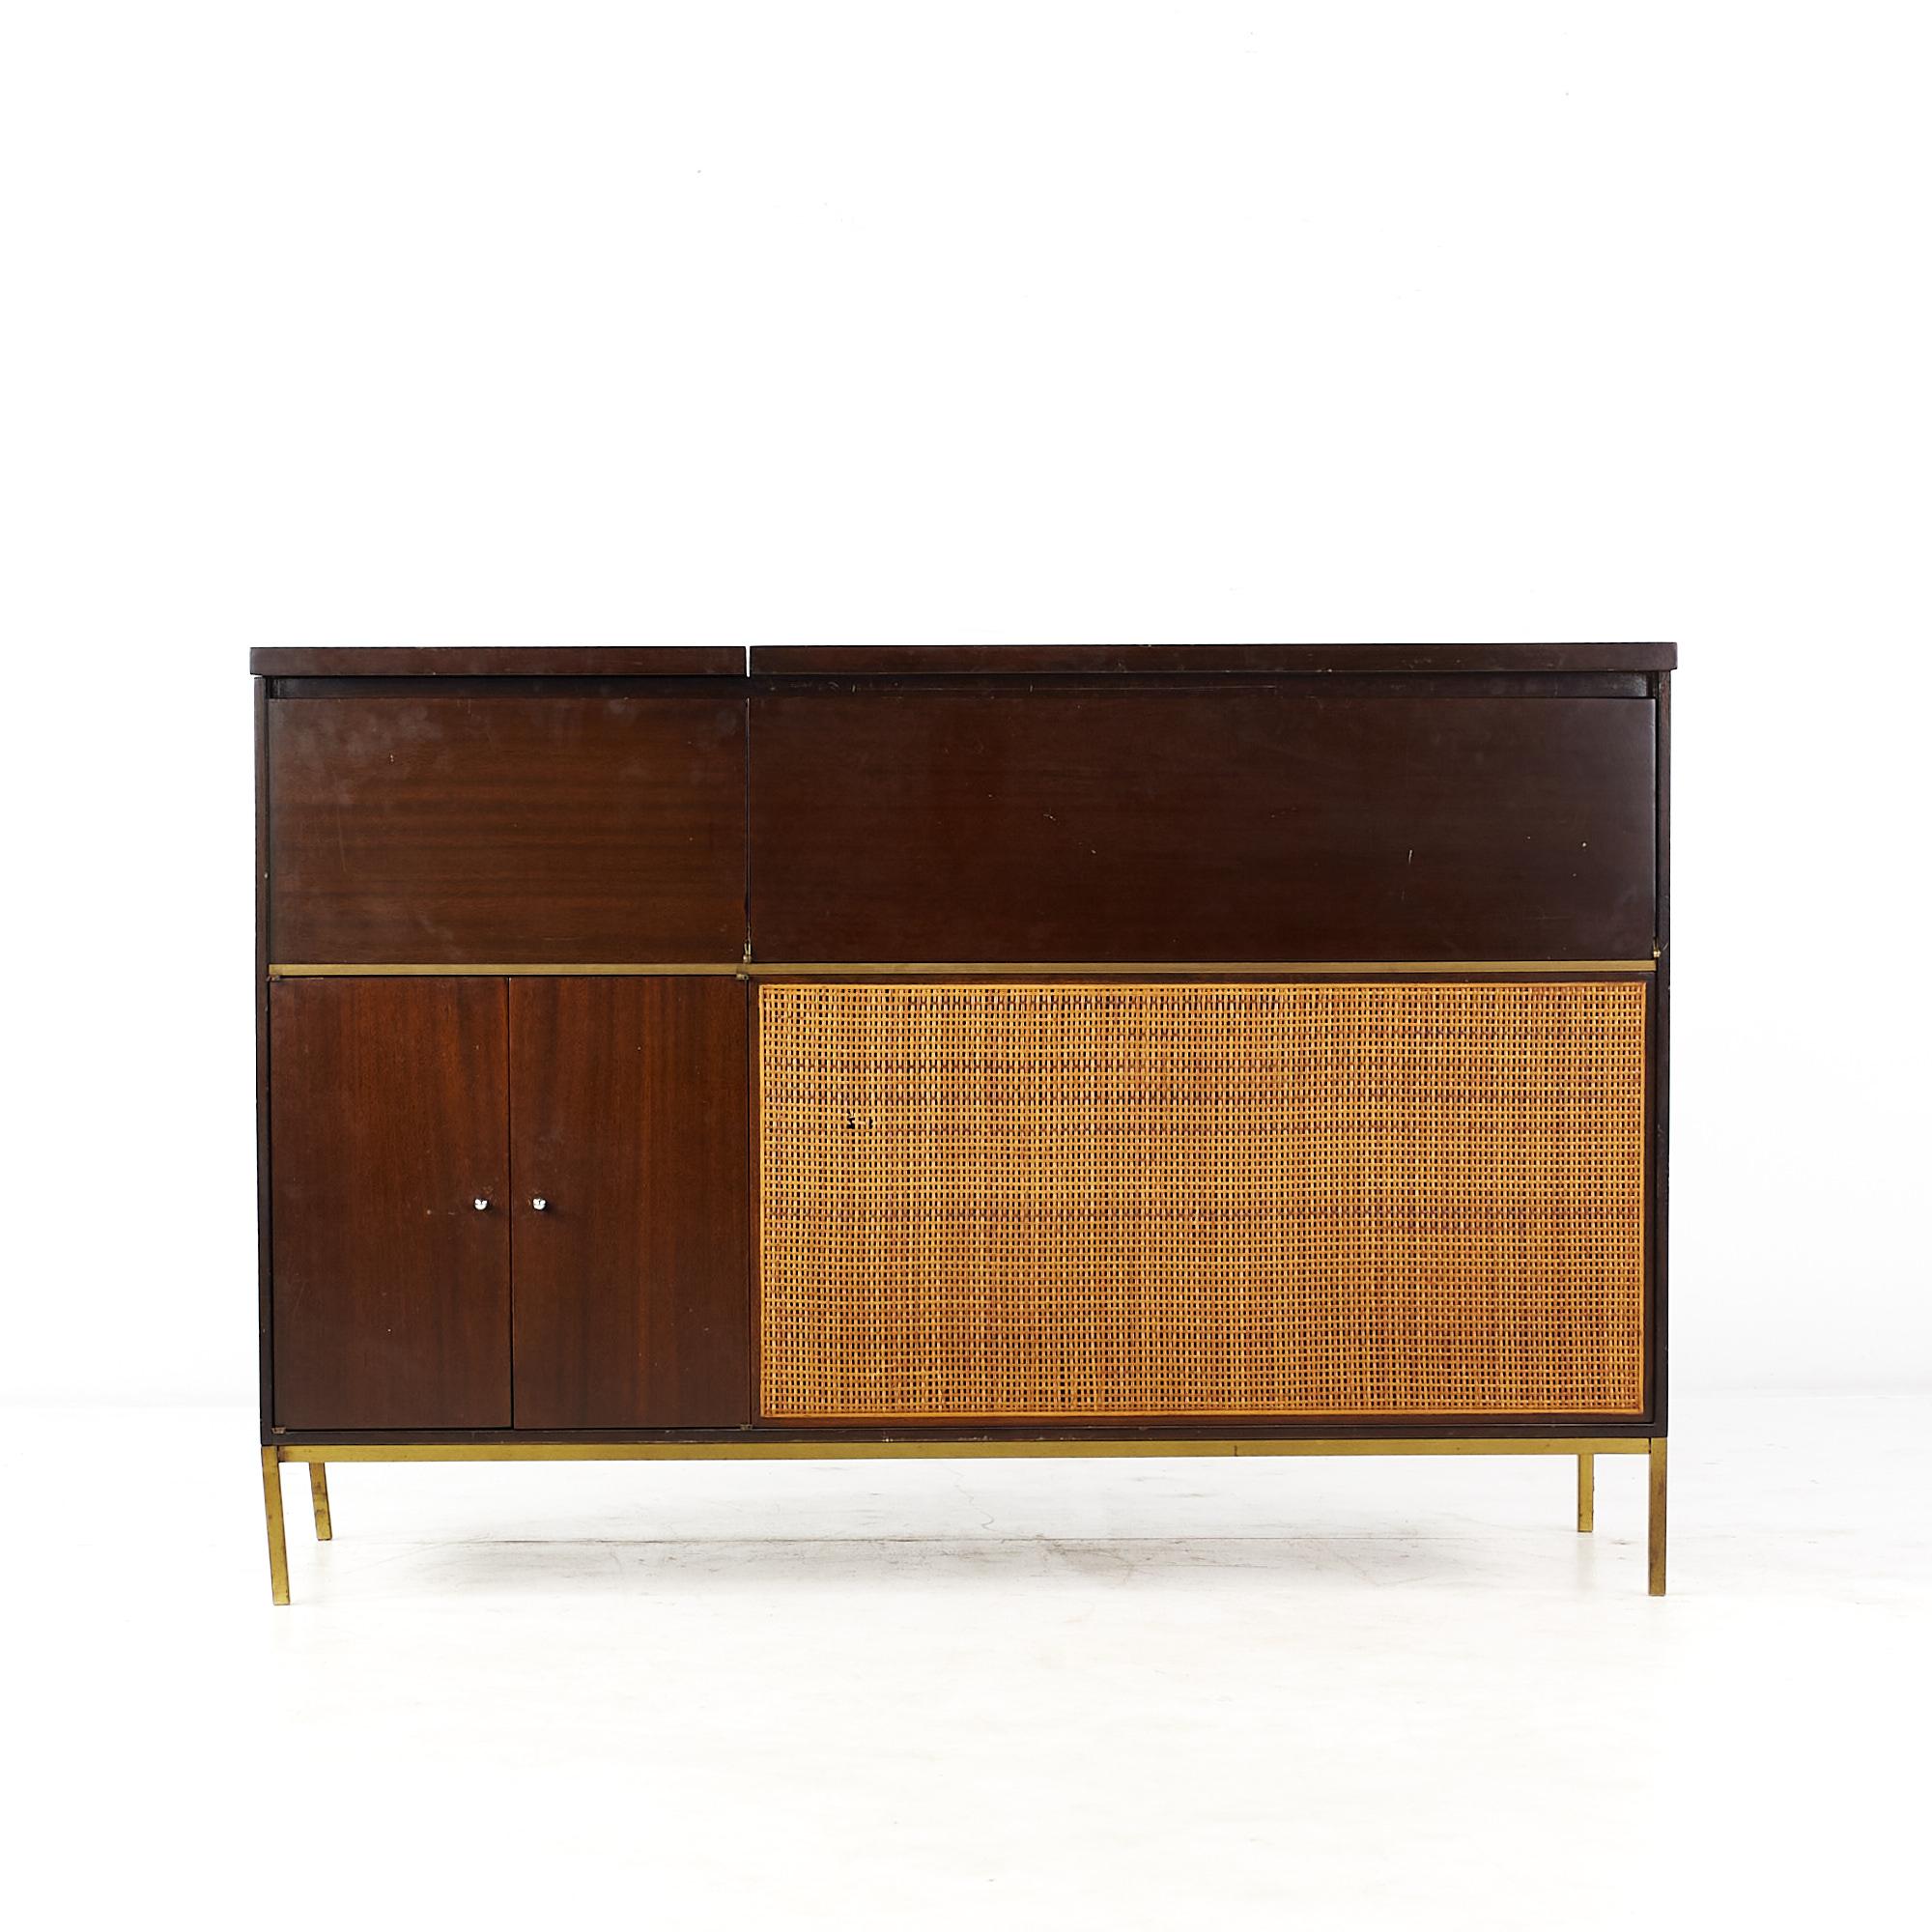 Paul McCobb for Bell and Howell Mid Century cane and brass Stereo Console

This stereo console measures: 50 wide x 19 deep x 33.75 inches high

All pieces of furniture can be had in what we call restored vintage condition. That means the piece